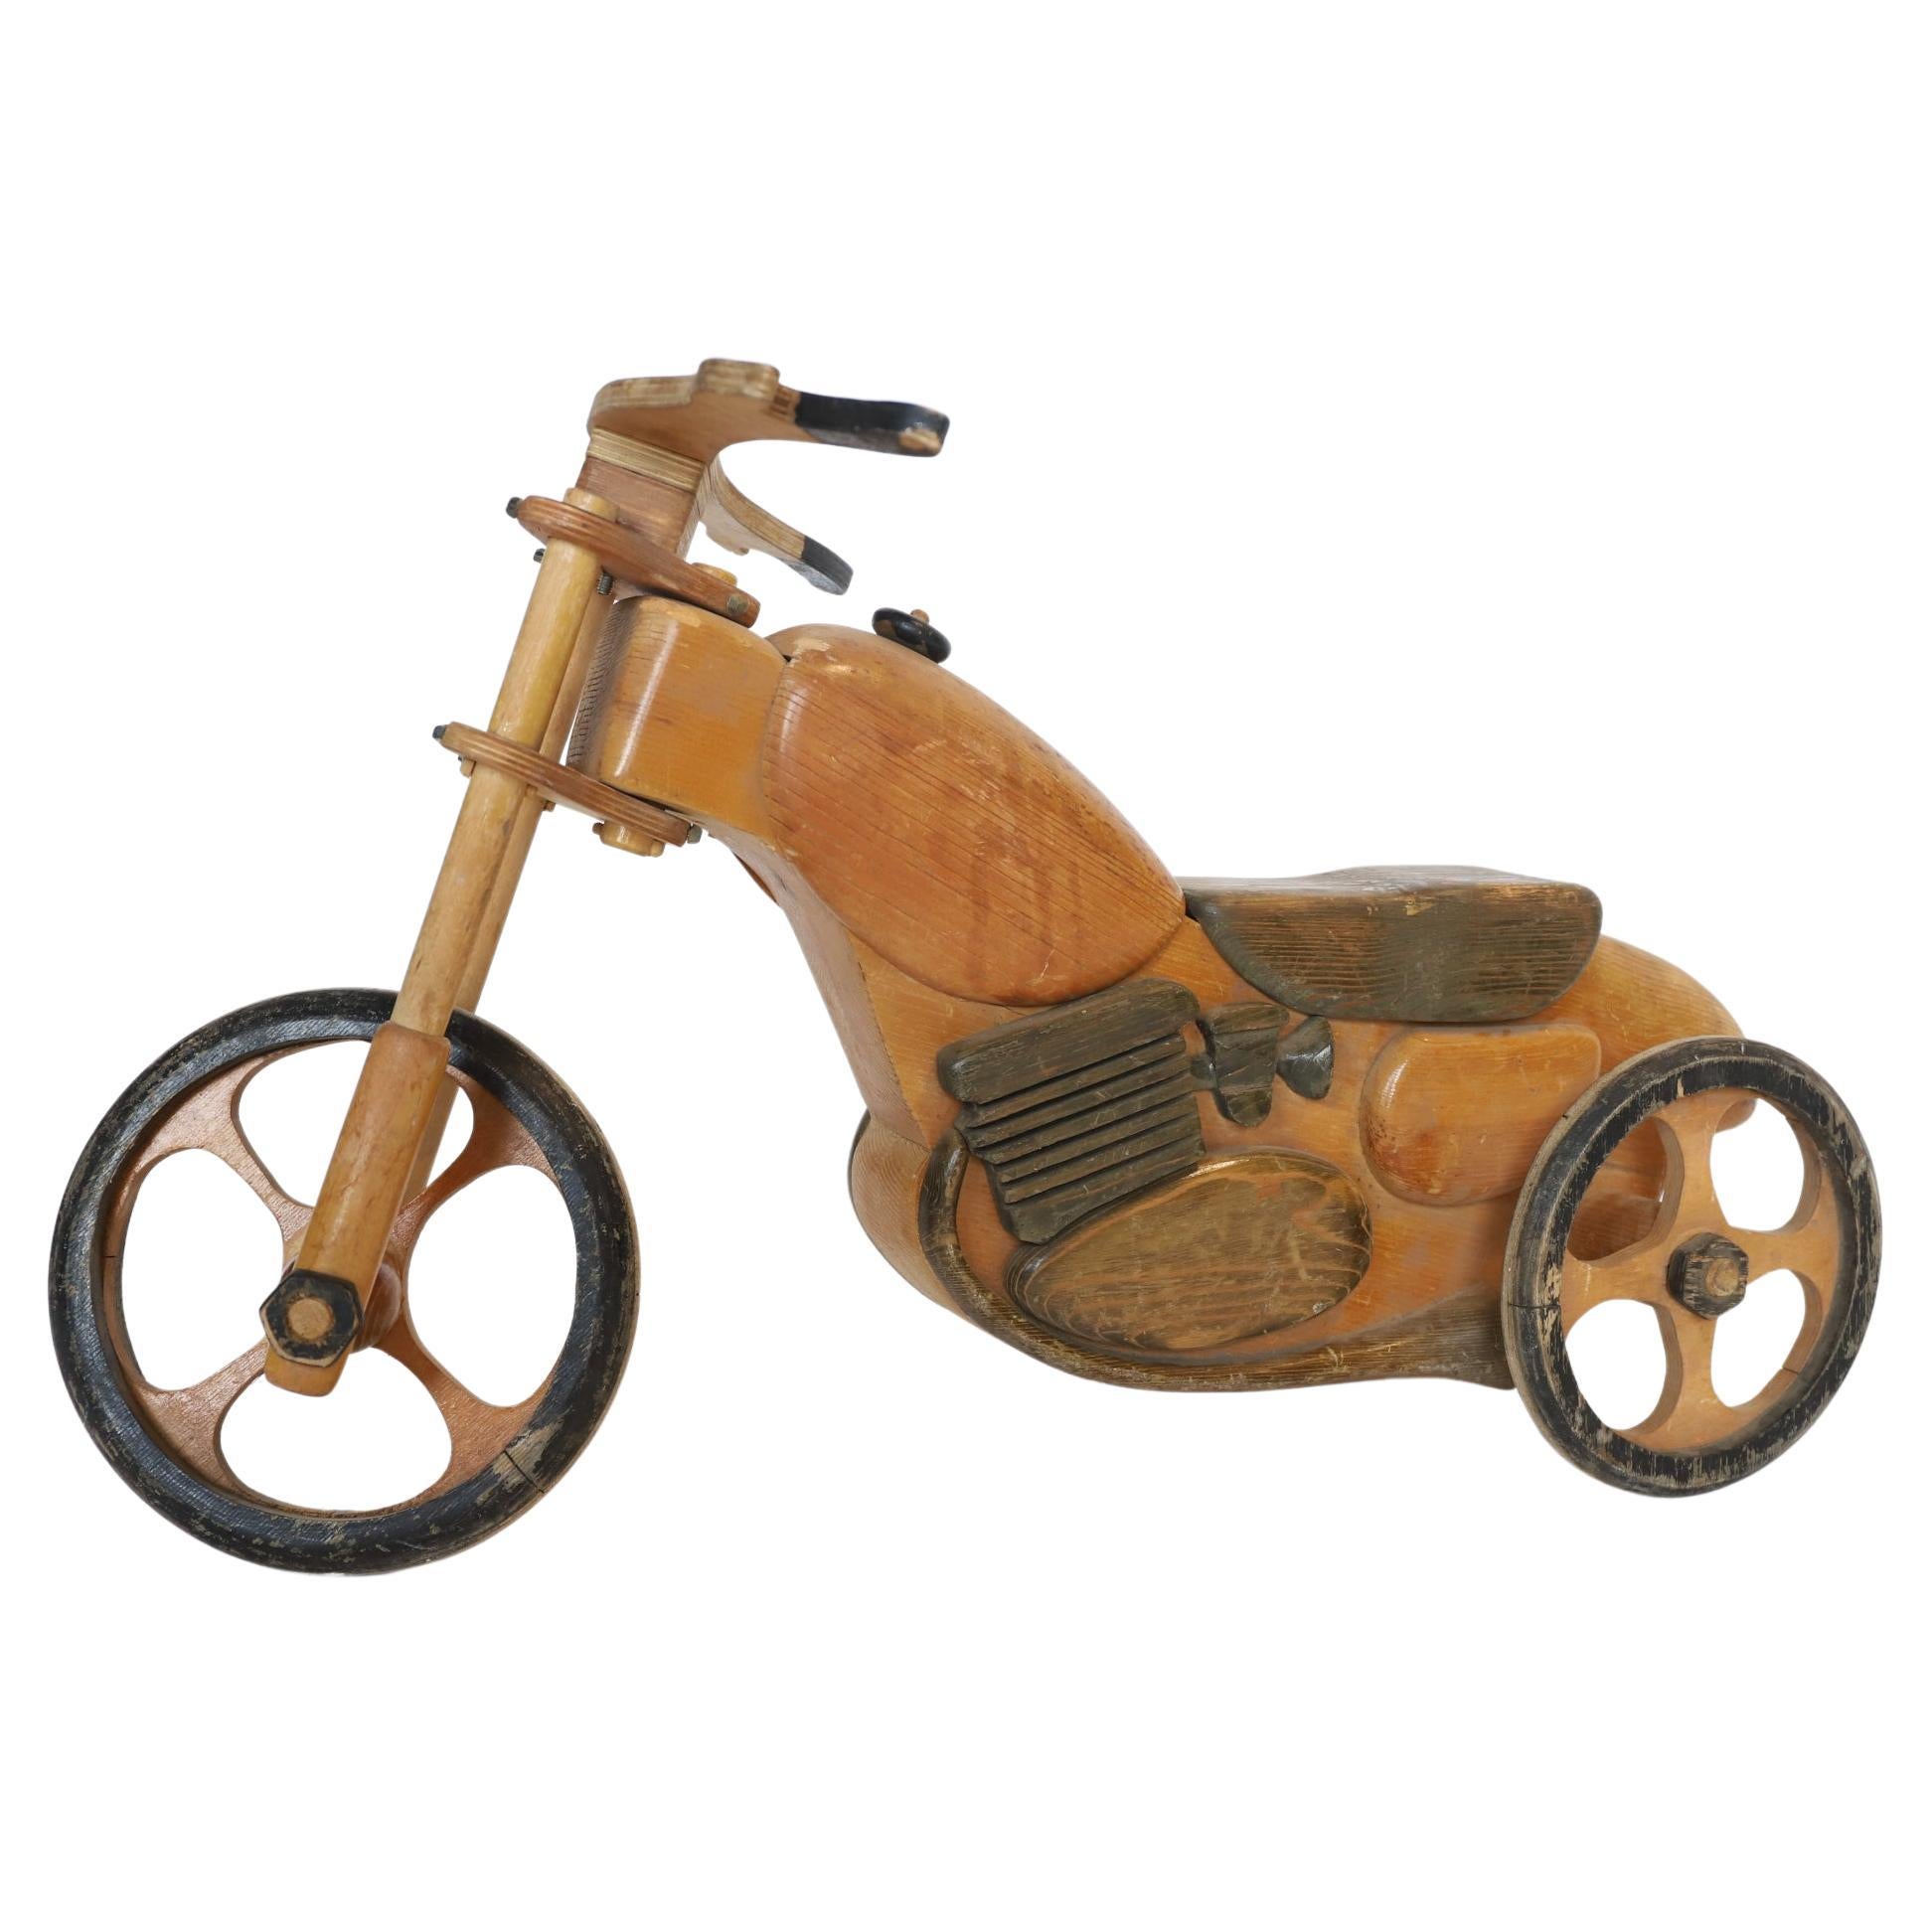 Child Sized Wooden Motorcycle For Sale